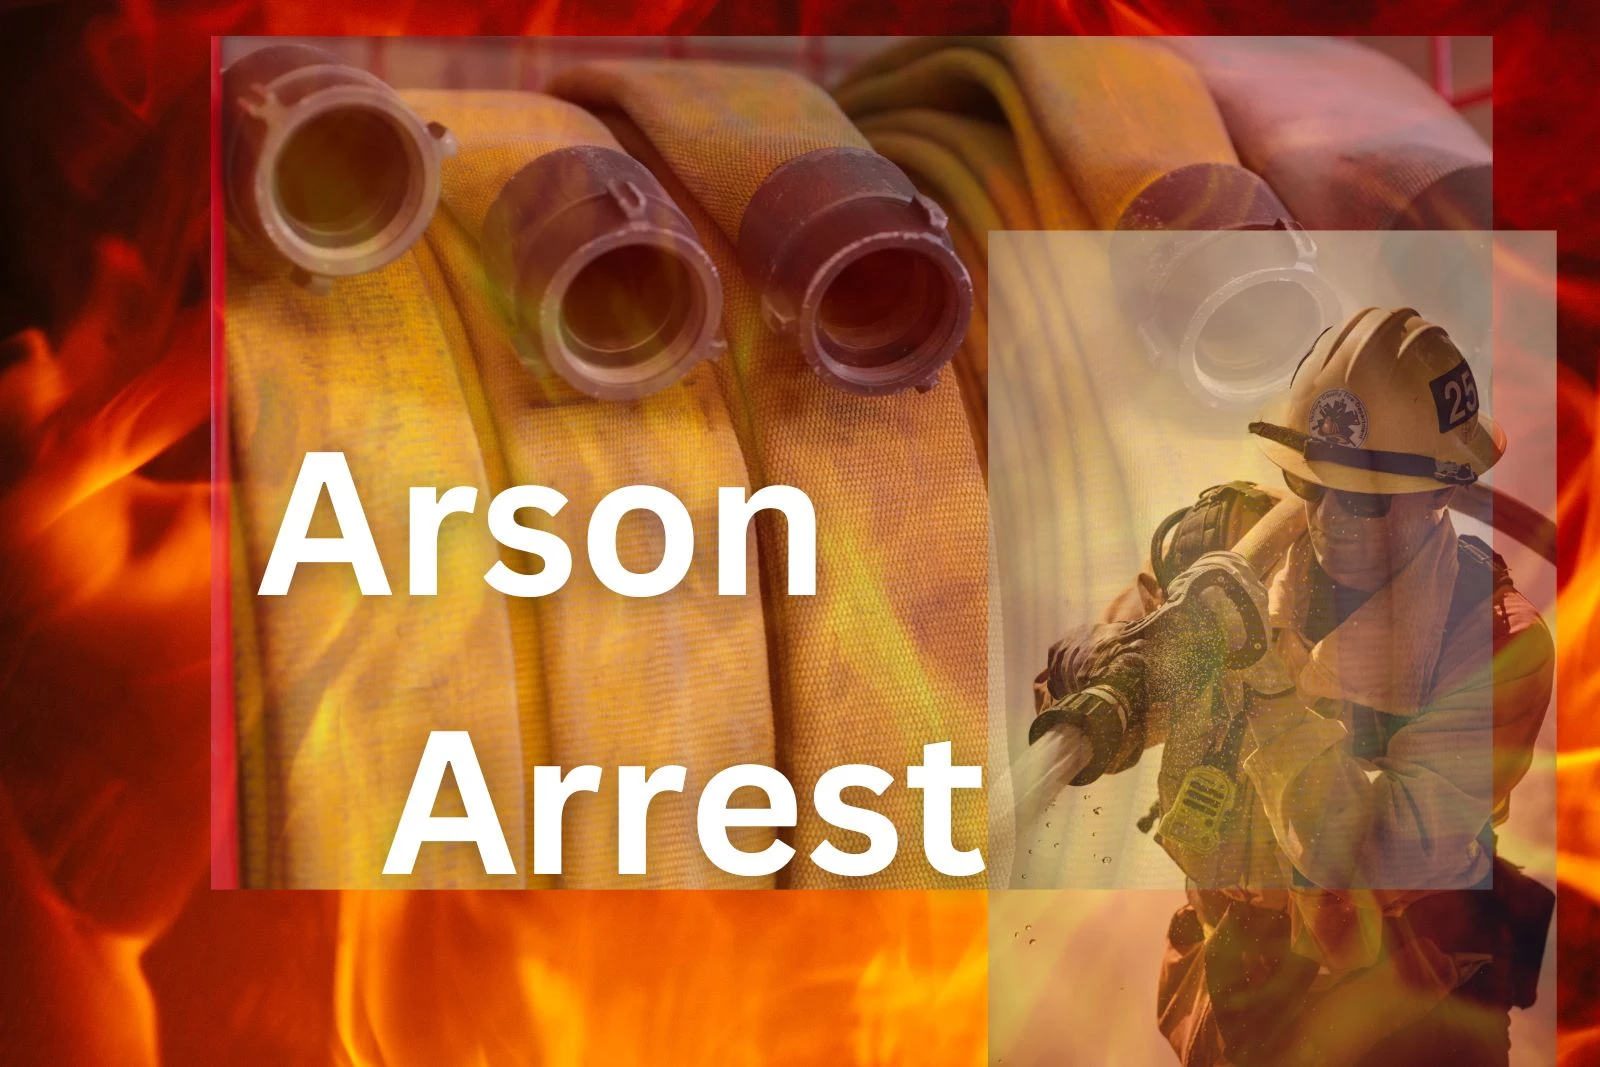 Woman Charged with Trying to Start Fire at Utica High Riseloading...